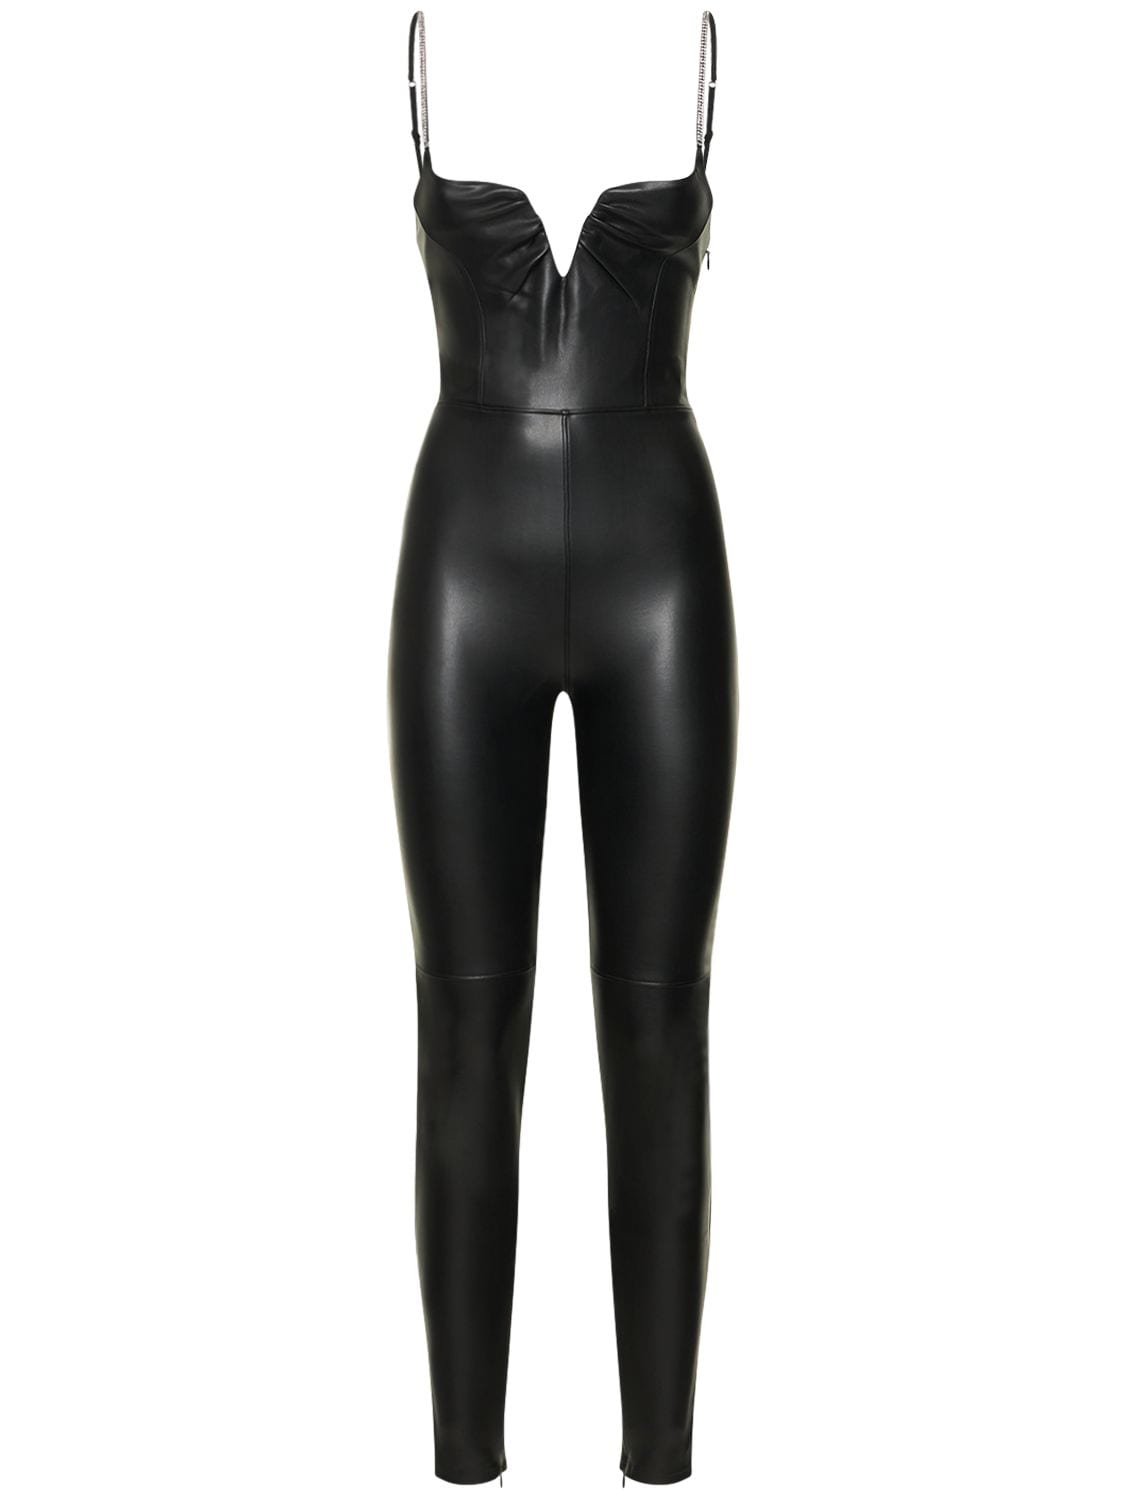 ALIX NYC ZANDER FAUX LEATHER CATSUIT